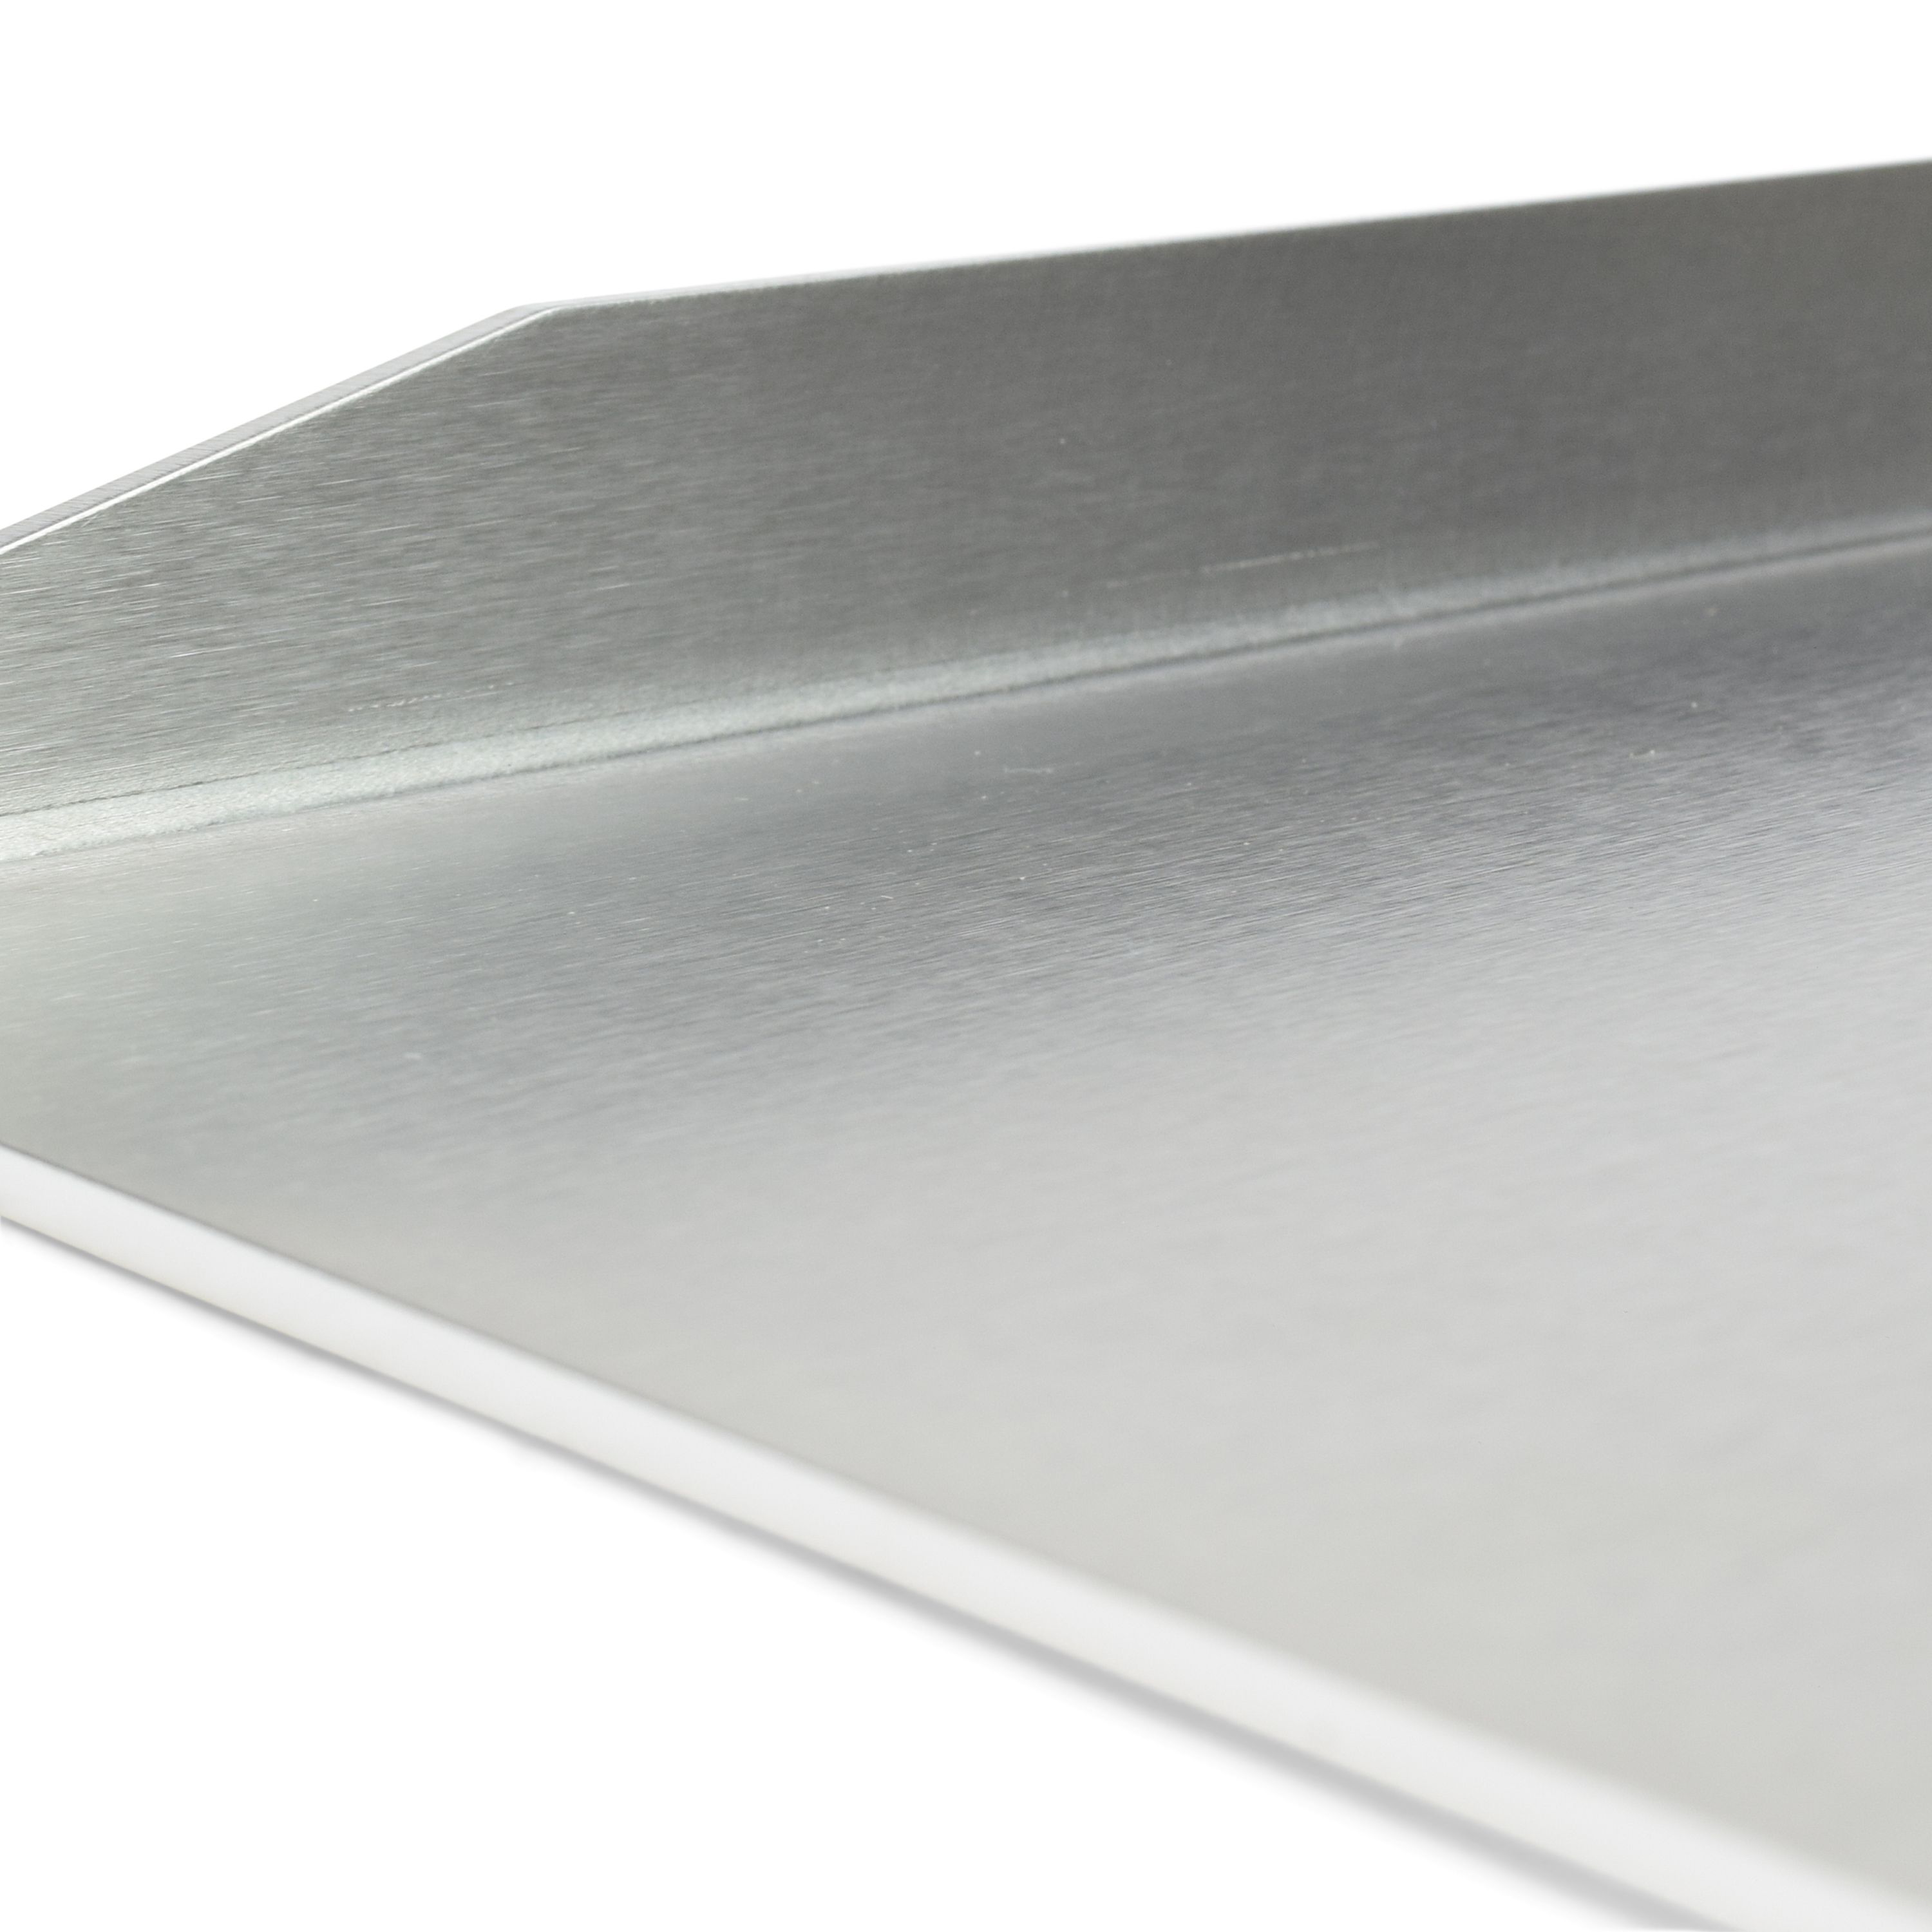 Stainless steel grill plate - Plancha 49 x 32,5cm for Weber Genesis 1 and Weber Summit